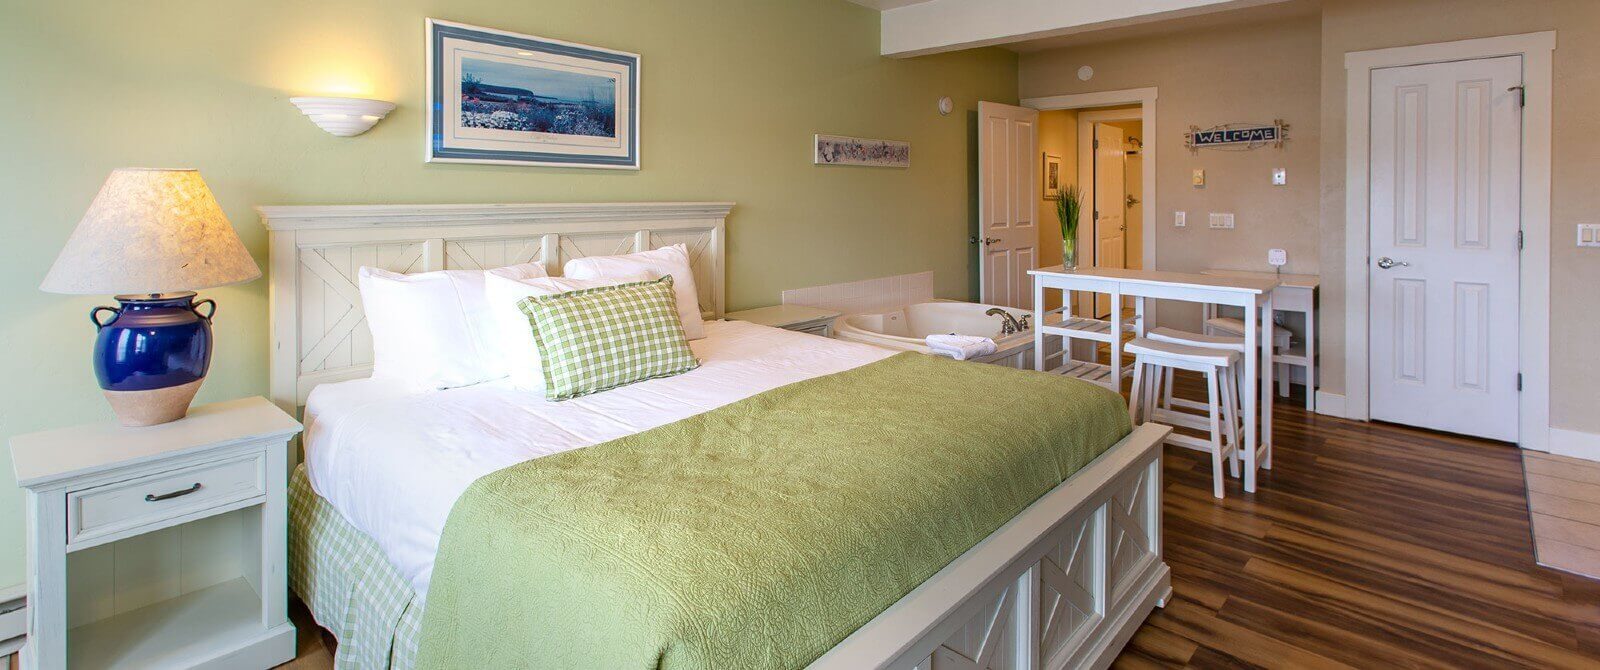 Bedroom with king bed, soaker tub, side table with lamp, bistro table with stools and hardwood floors